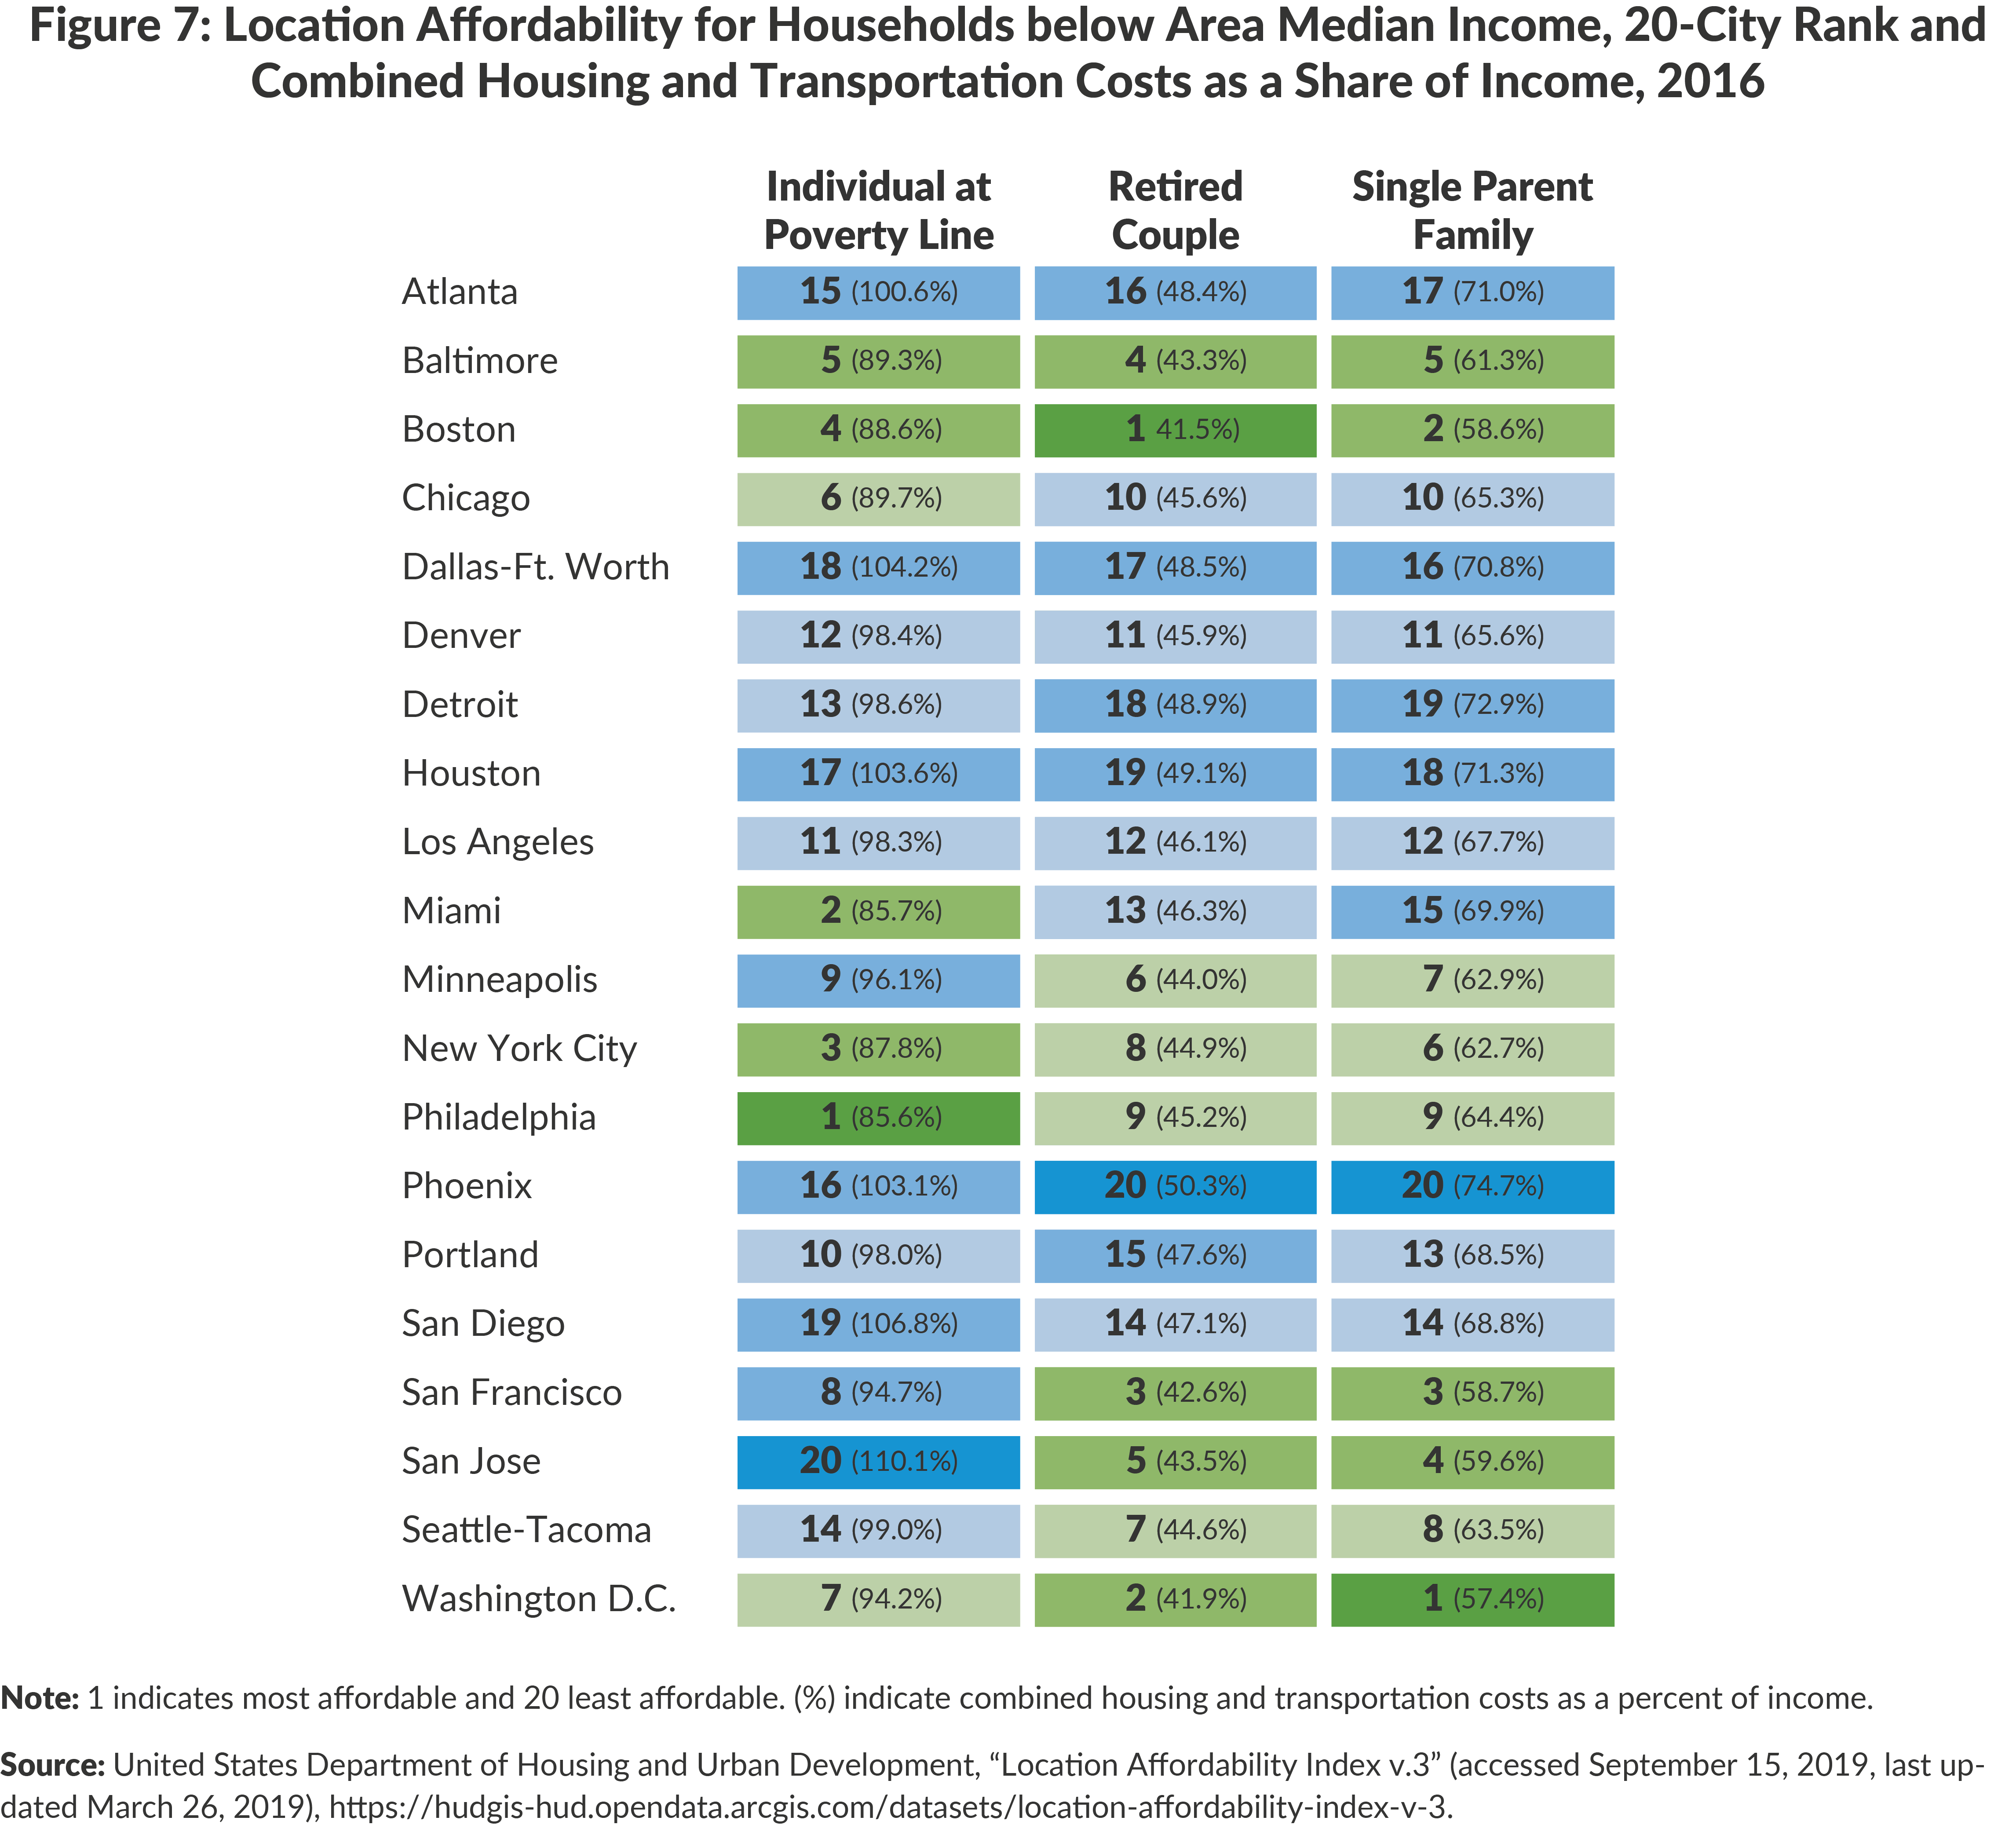 Figure 7. Location Affordability for Households below Area Median Income, 20-City Rank and Combined Housing and Transportation Costs as a Share of Income, 2016